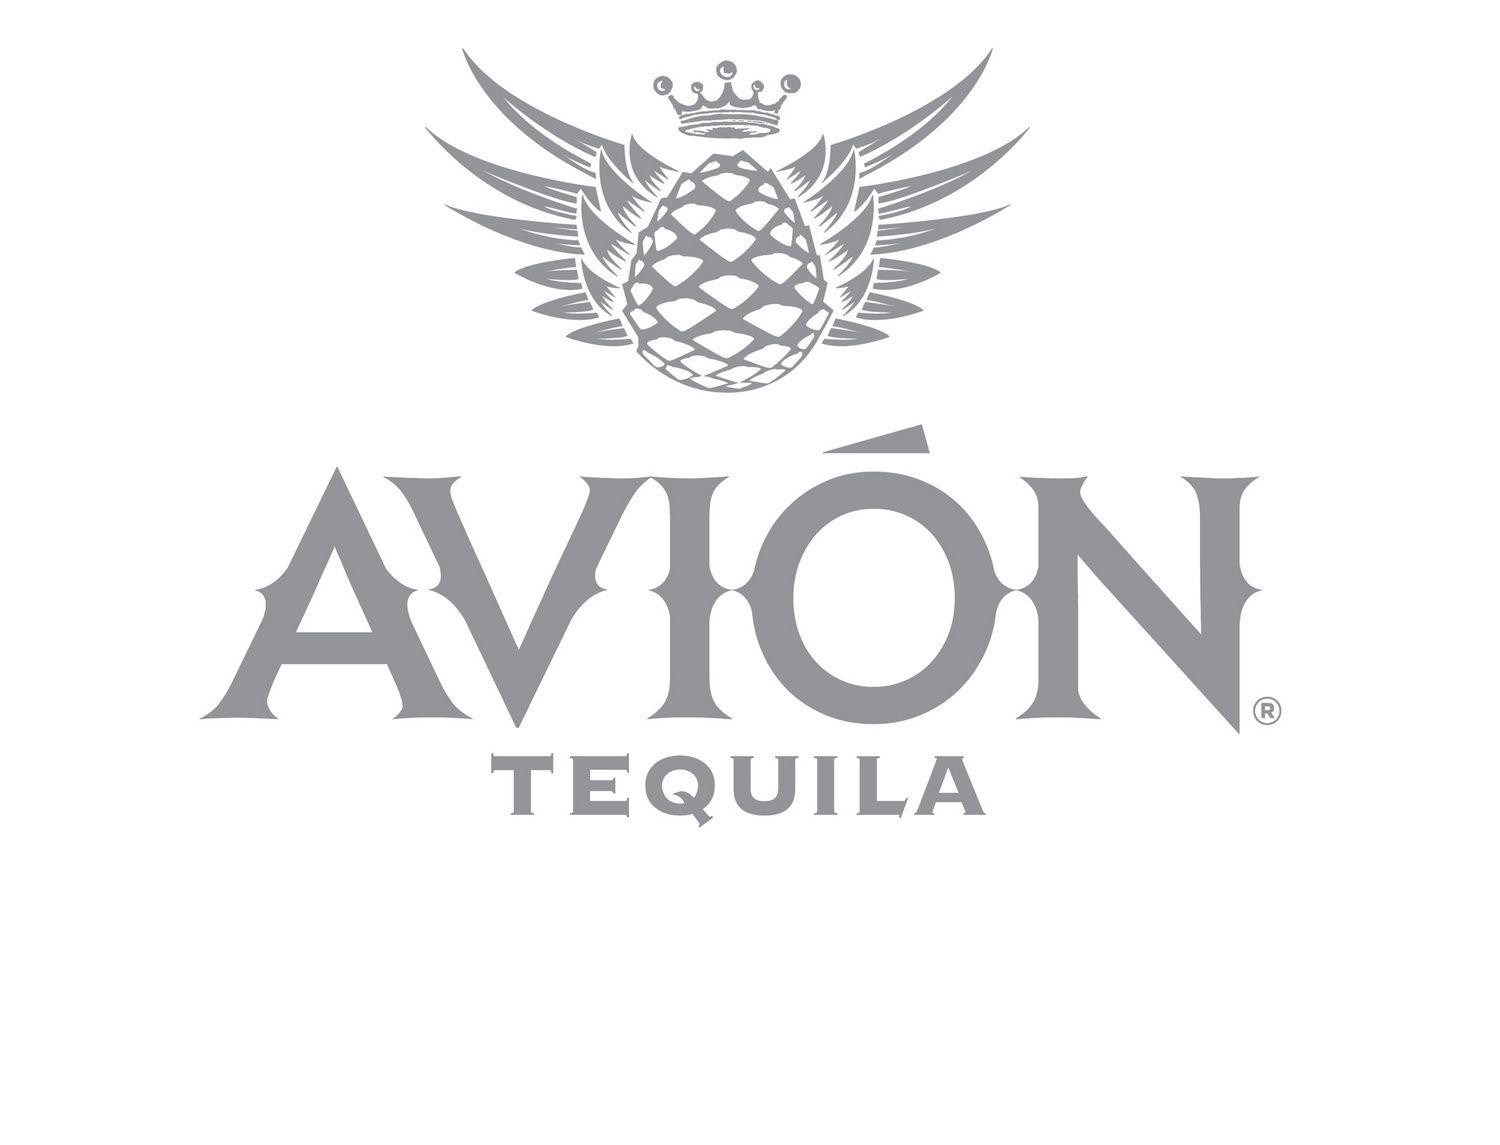 Avion Tequila Logo - Mike LoPriore / Creative Advertising